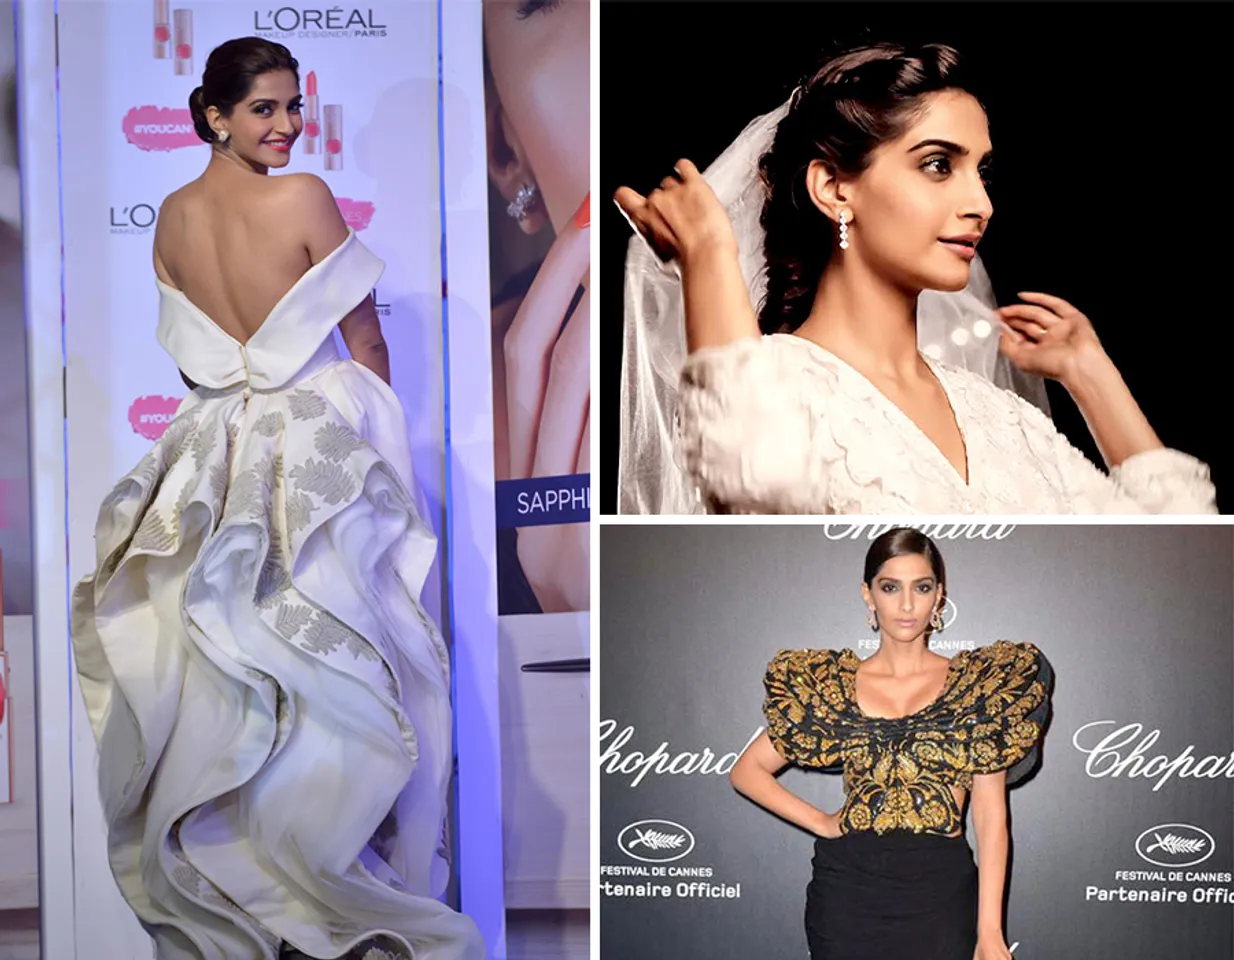 5 OF SONAM KAPOOR'S MOST OUTRAGEOUS YET ENDEARING LOOKS